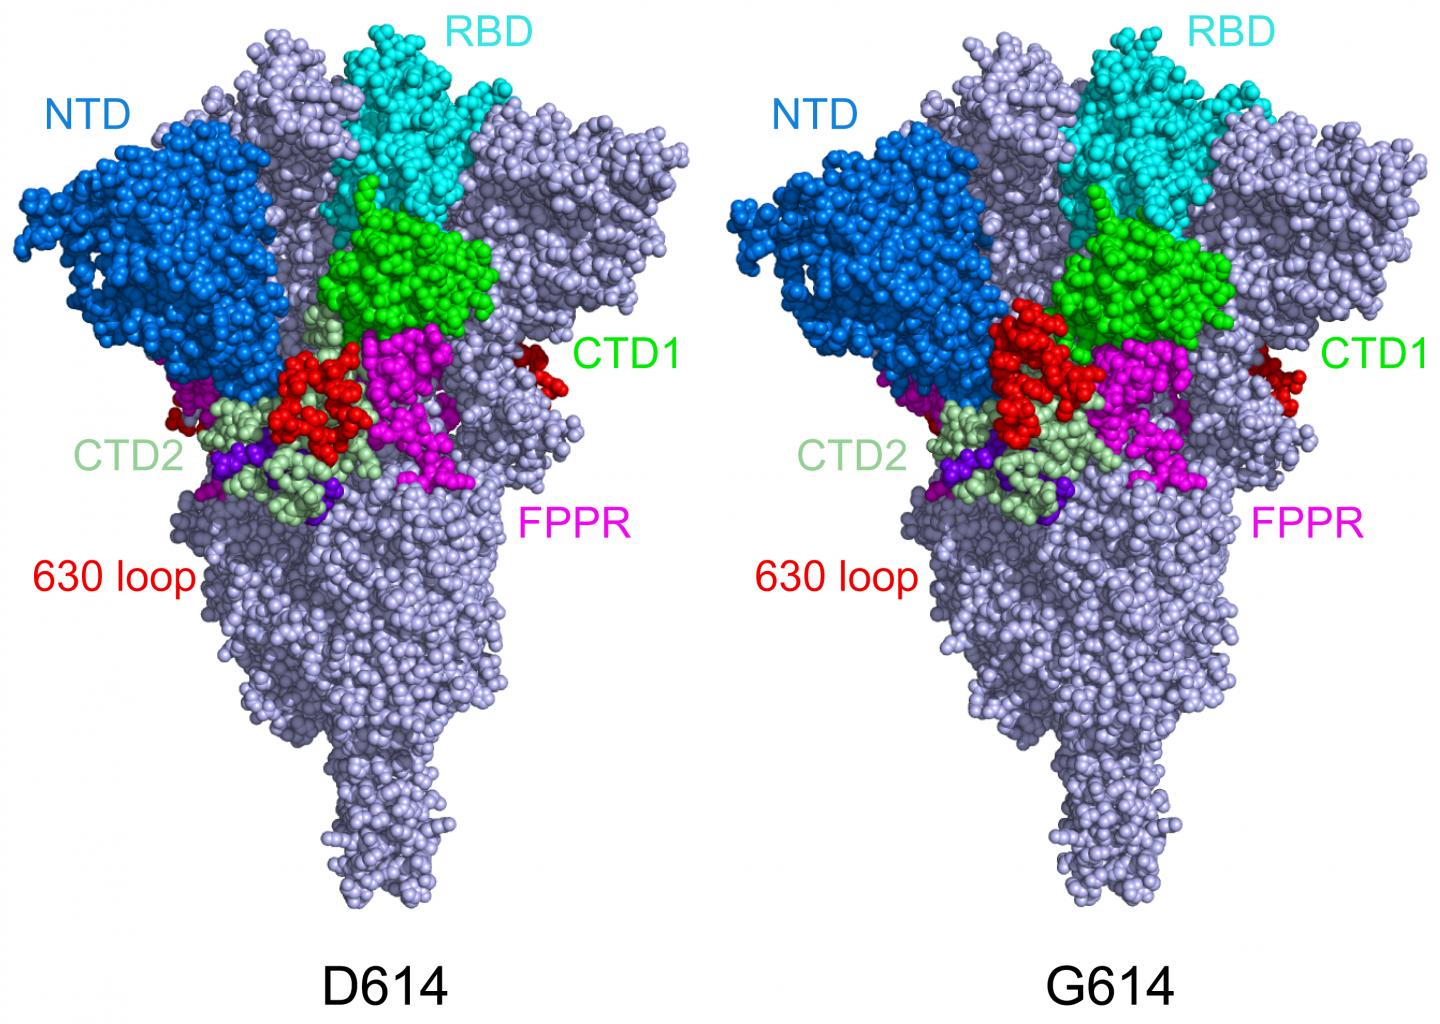 Cryo-EM structures of the original and mutated SARS-CoV-2 spike protein